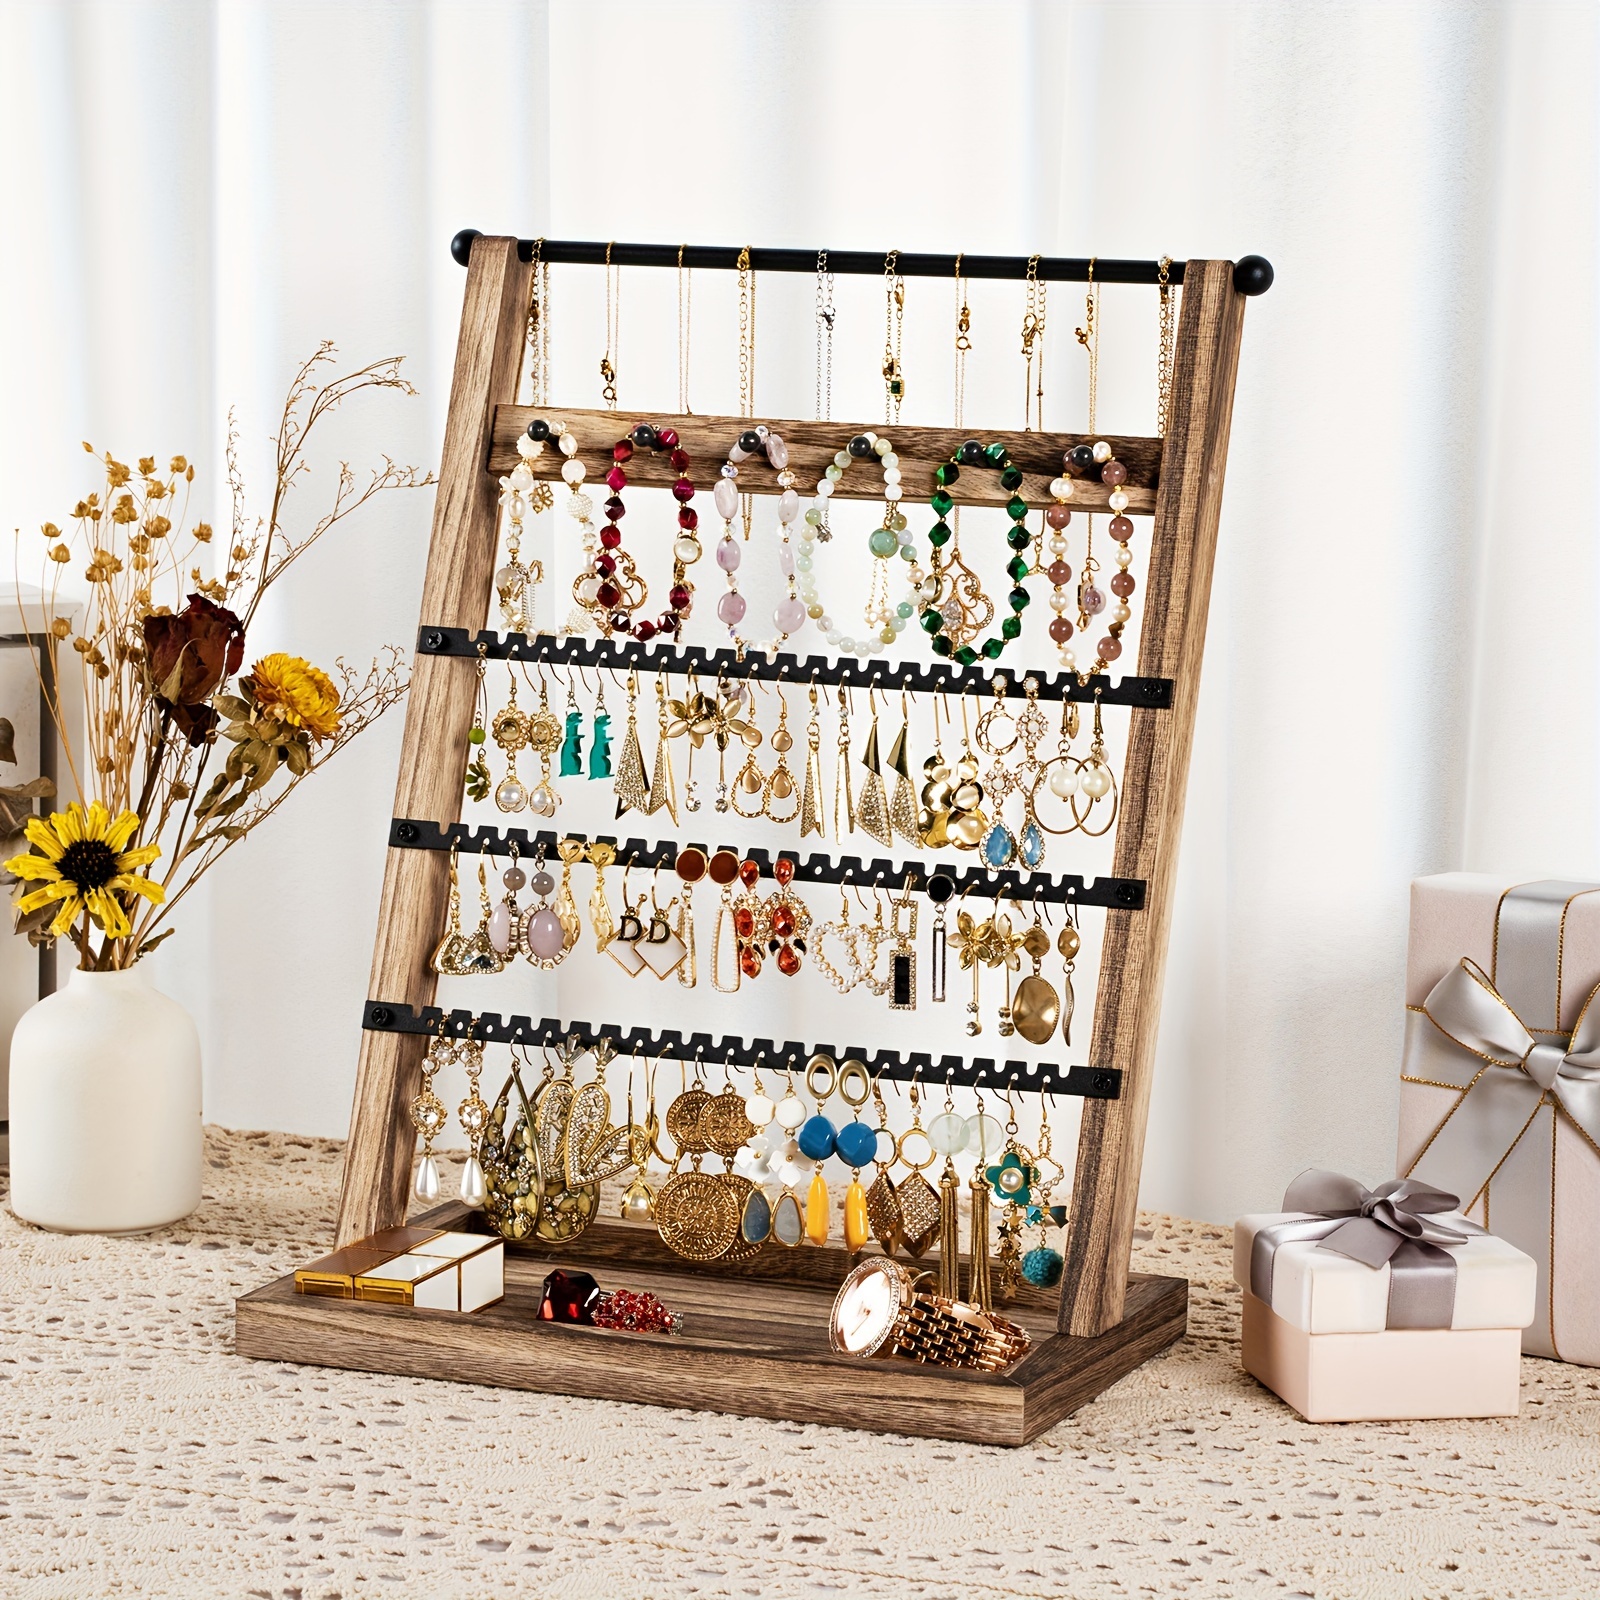 

1pc Earring Holder, 5-tier Ear Stud Holder With Wooden Tray, Jewelry Organizer Holder For Earrings, Necklaces, Rings, Earring Display Stand With 129 Holes